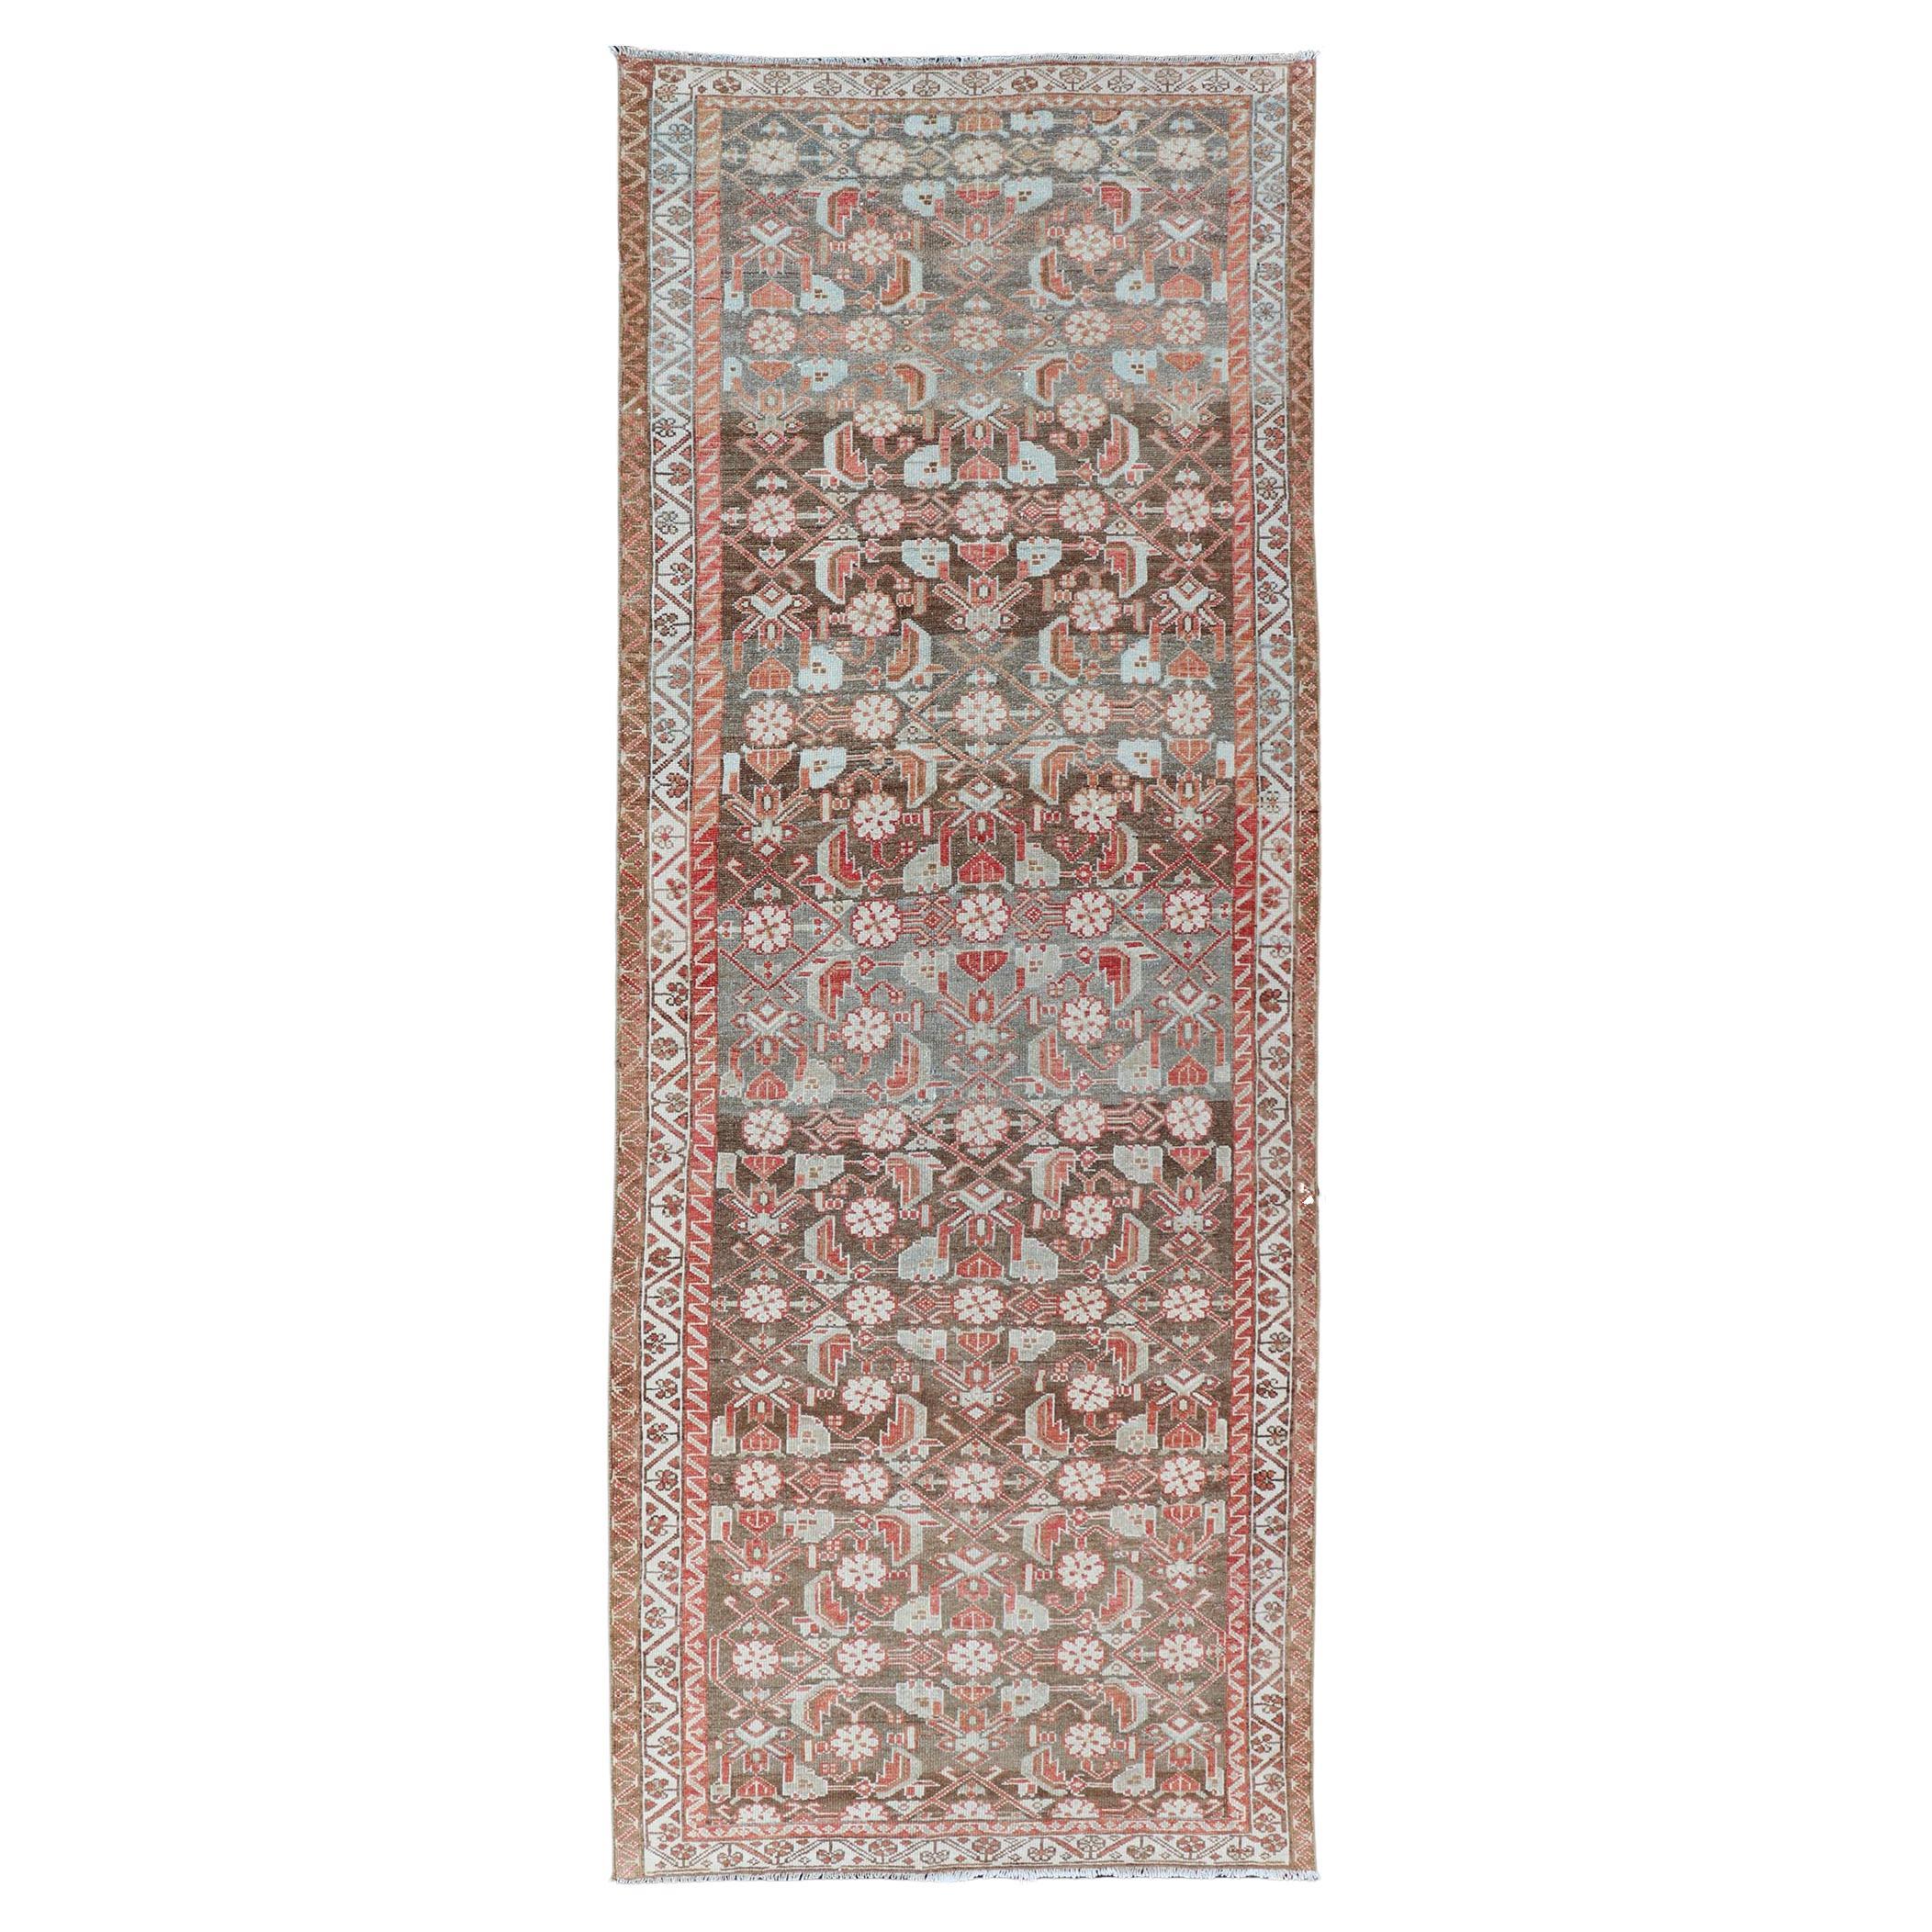 Antique Persian Malayer with Sub-Geometric Floral Design in Reds & Earthy Tones